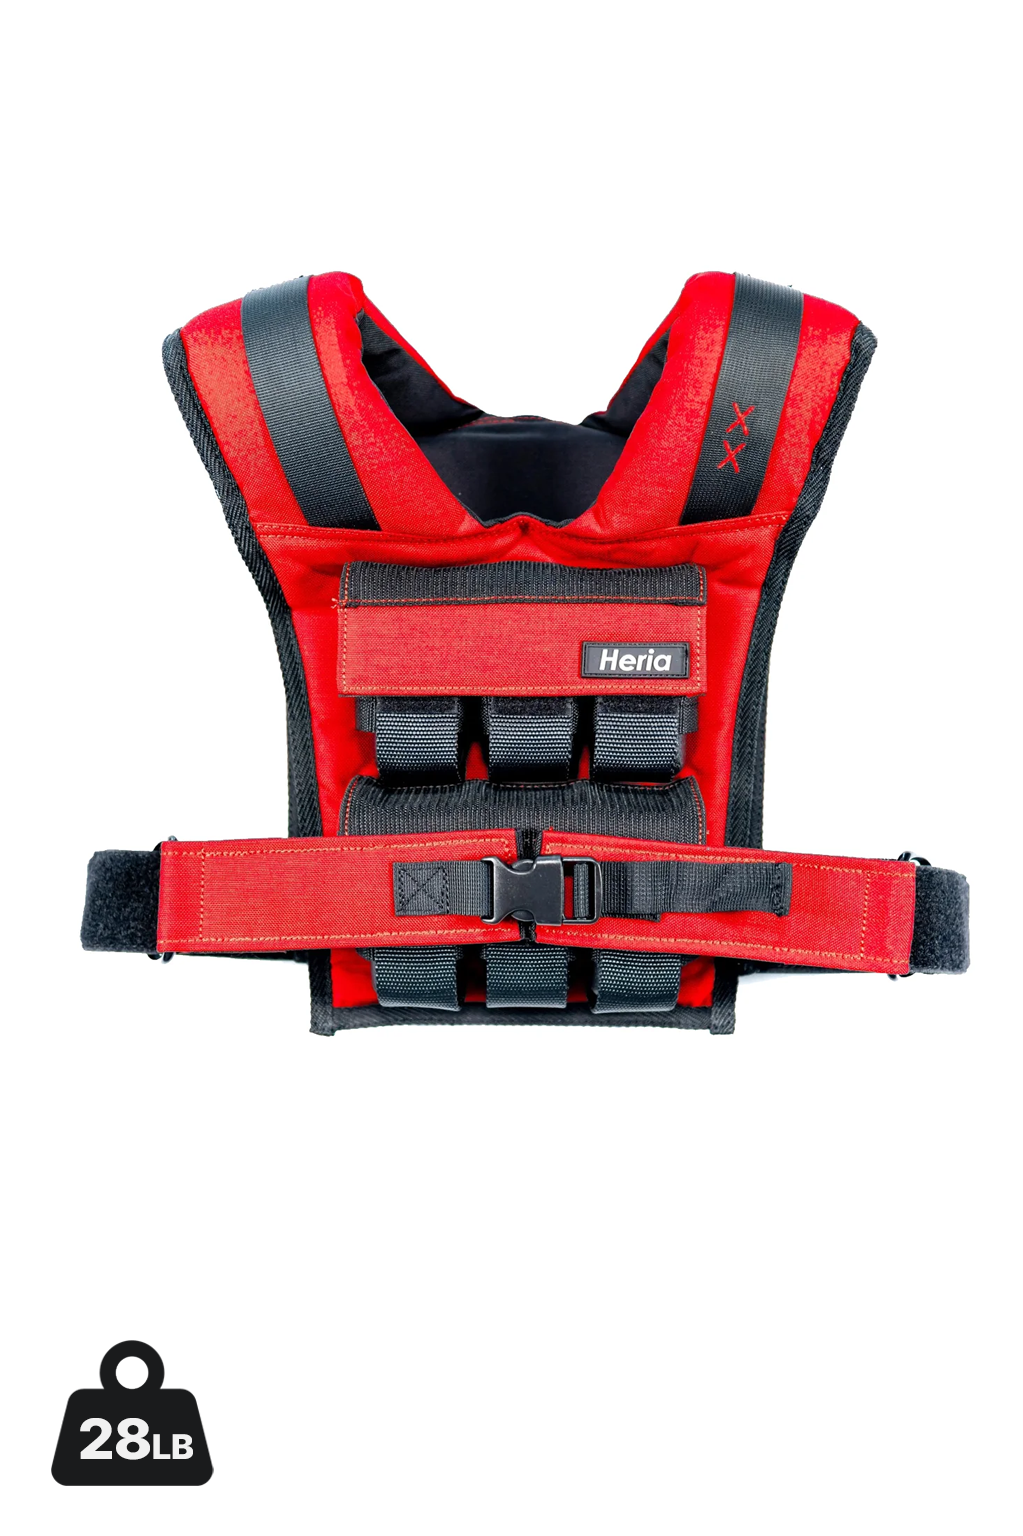 28LB Weight Vest - Red